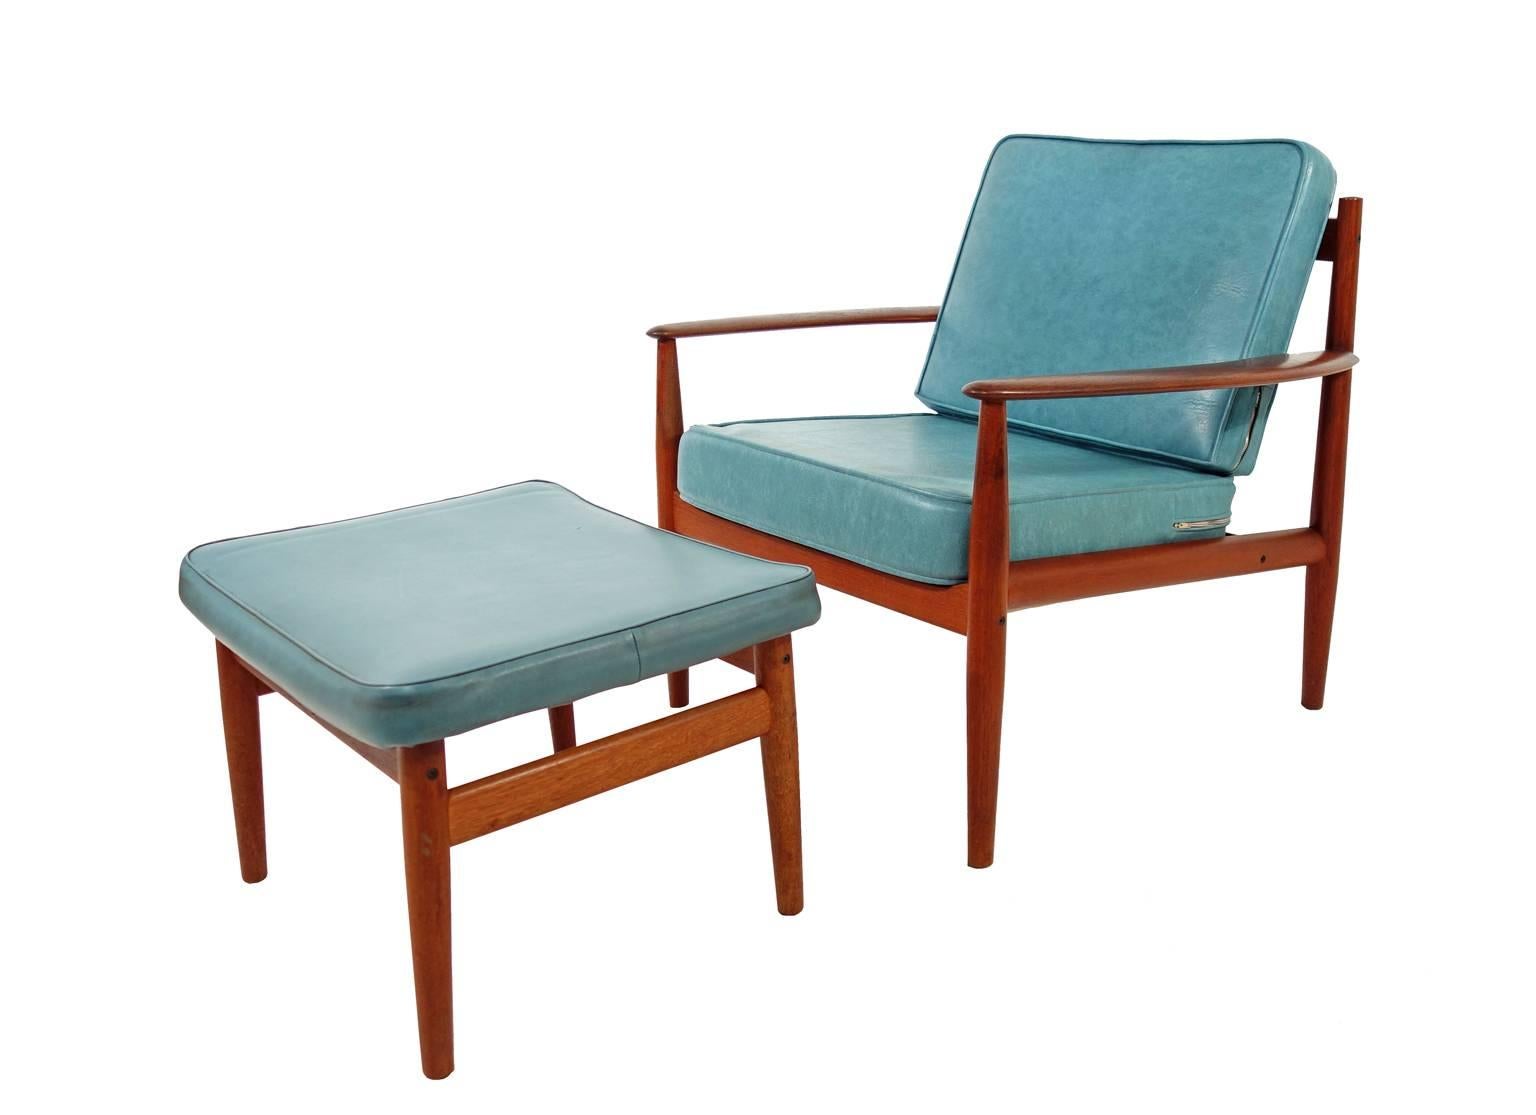 Grete Jalk is one of the most influential Danish modern designers. This beautifully constructed teak lounge chair includes the rare ottoman. The original finish is in excellent condition with a nice warm patina. Original high quality Naugahyde